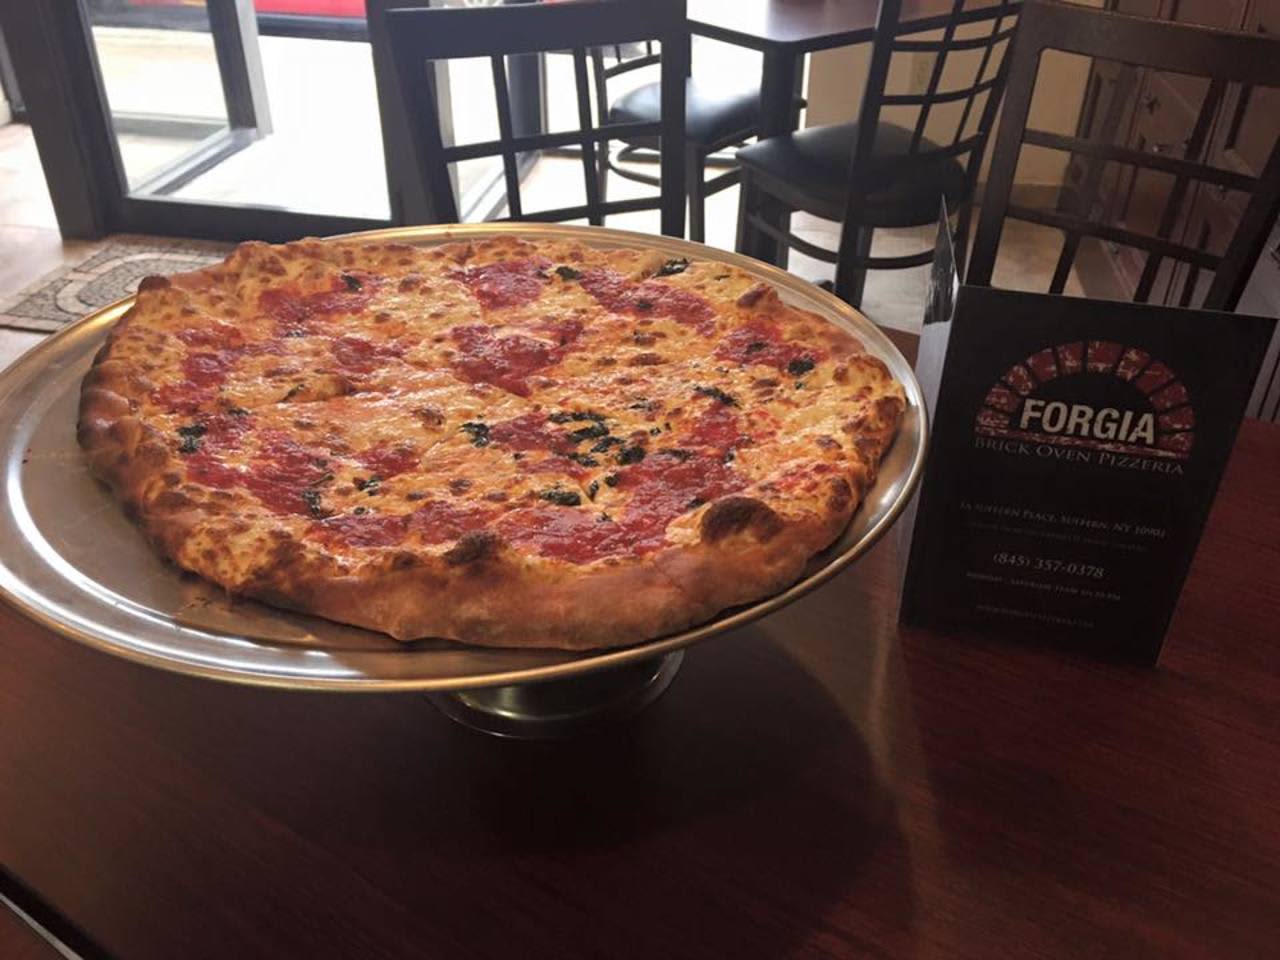 A sample of the offerings at Forgia Brick Oven Pizza.